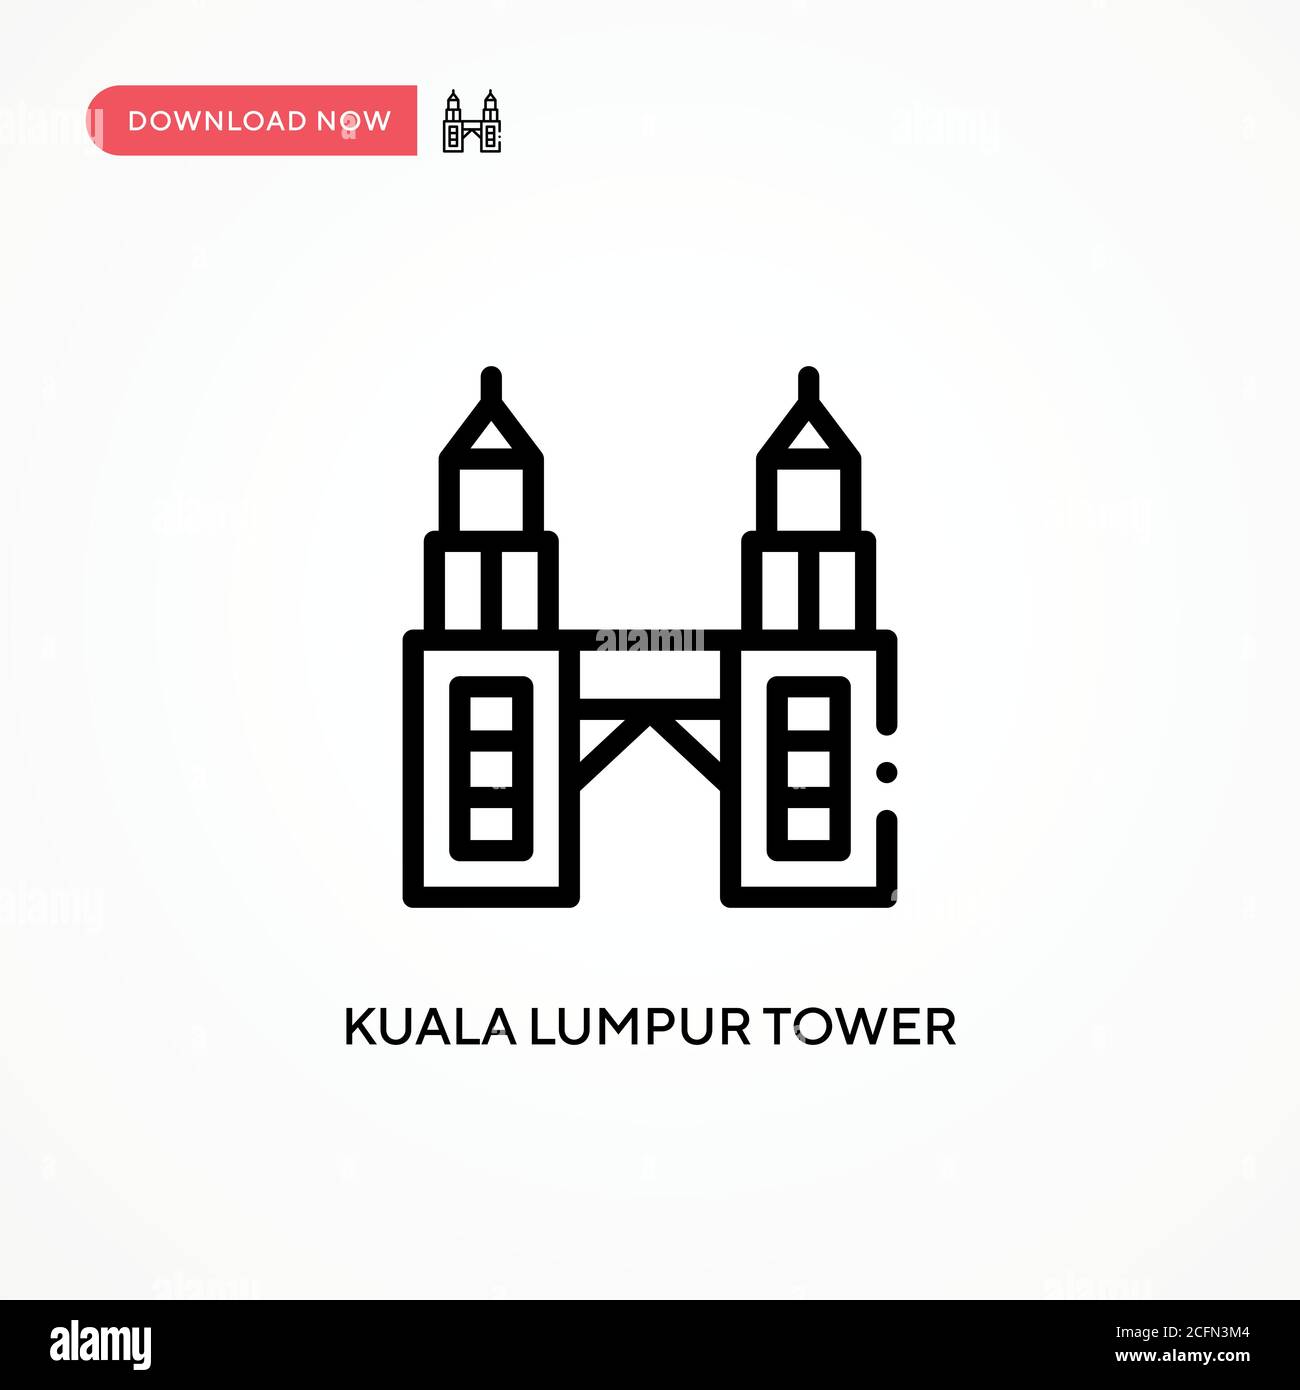 Kuala lumpur tower vector icon. Modern, simple flat vector illustration for web site or mobile app Stock Vector